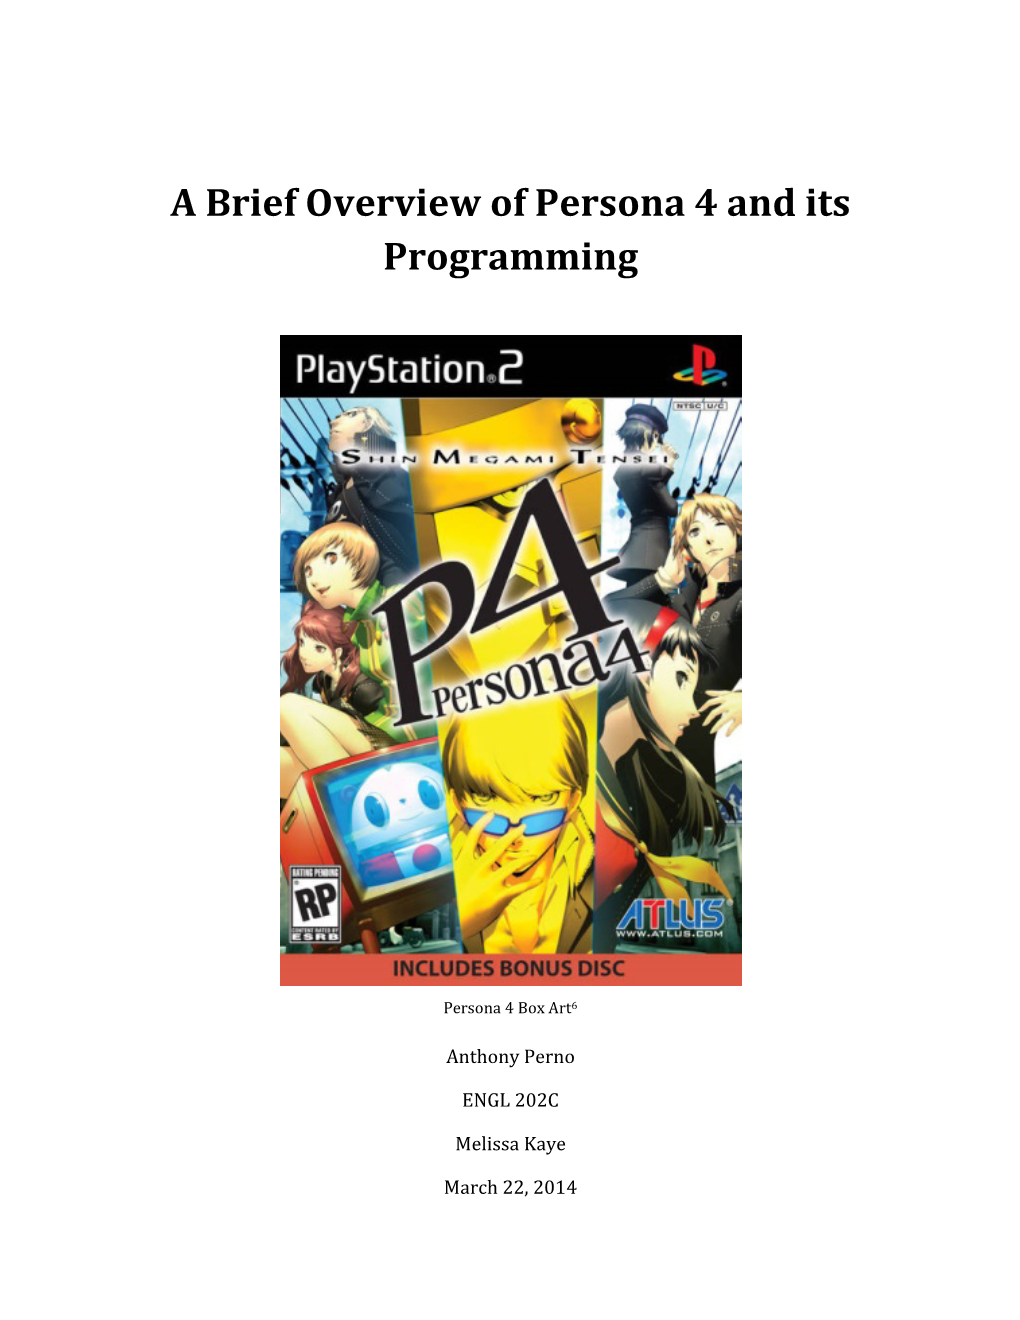 A Brief Overview of Persona 4 and Its Programming